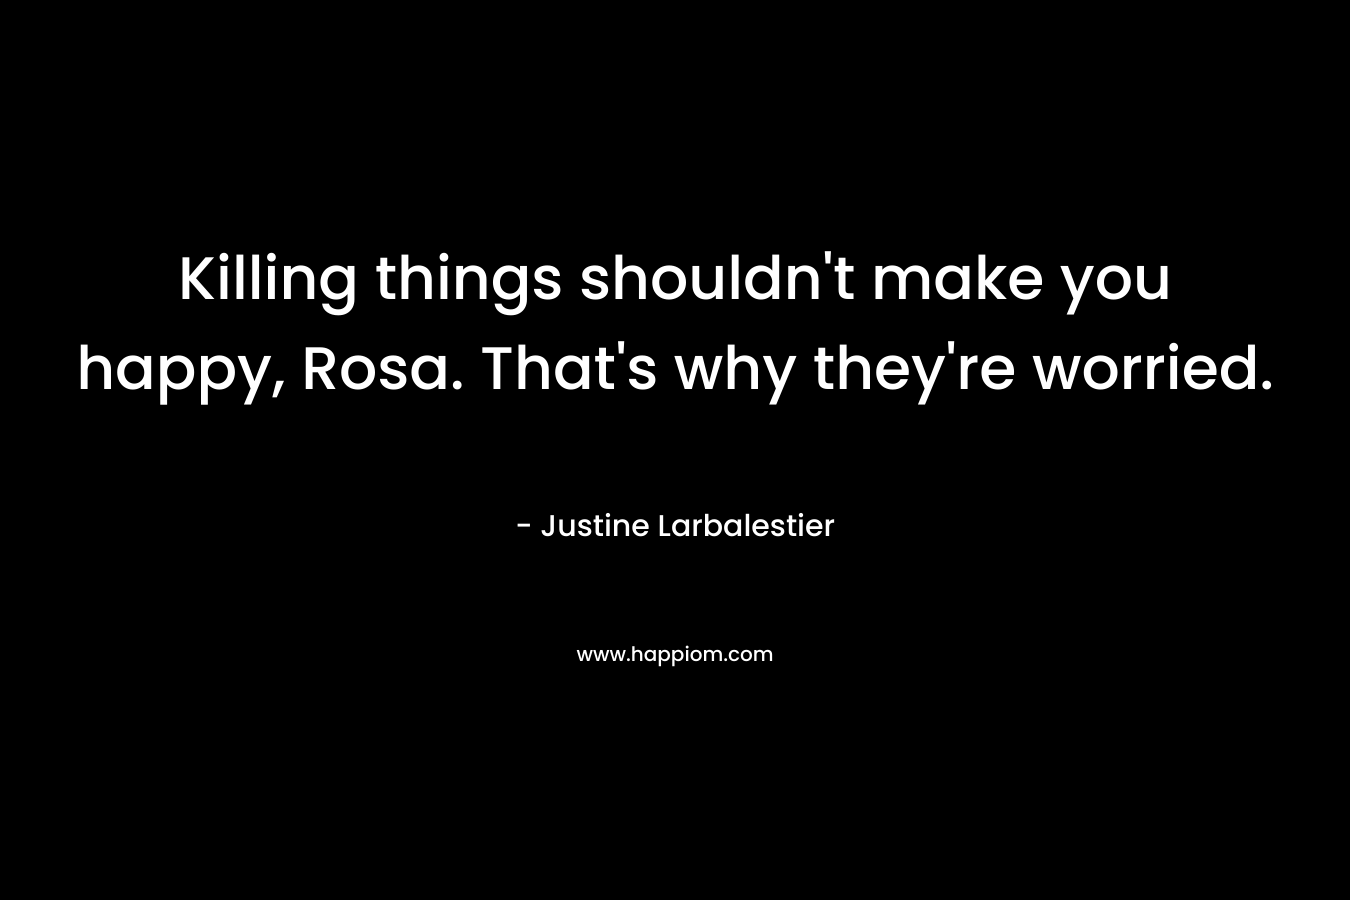 Killing things shouldn’t make you happy, Rosa. That’s why they’re worried. – Justine Larbalestier